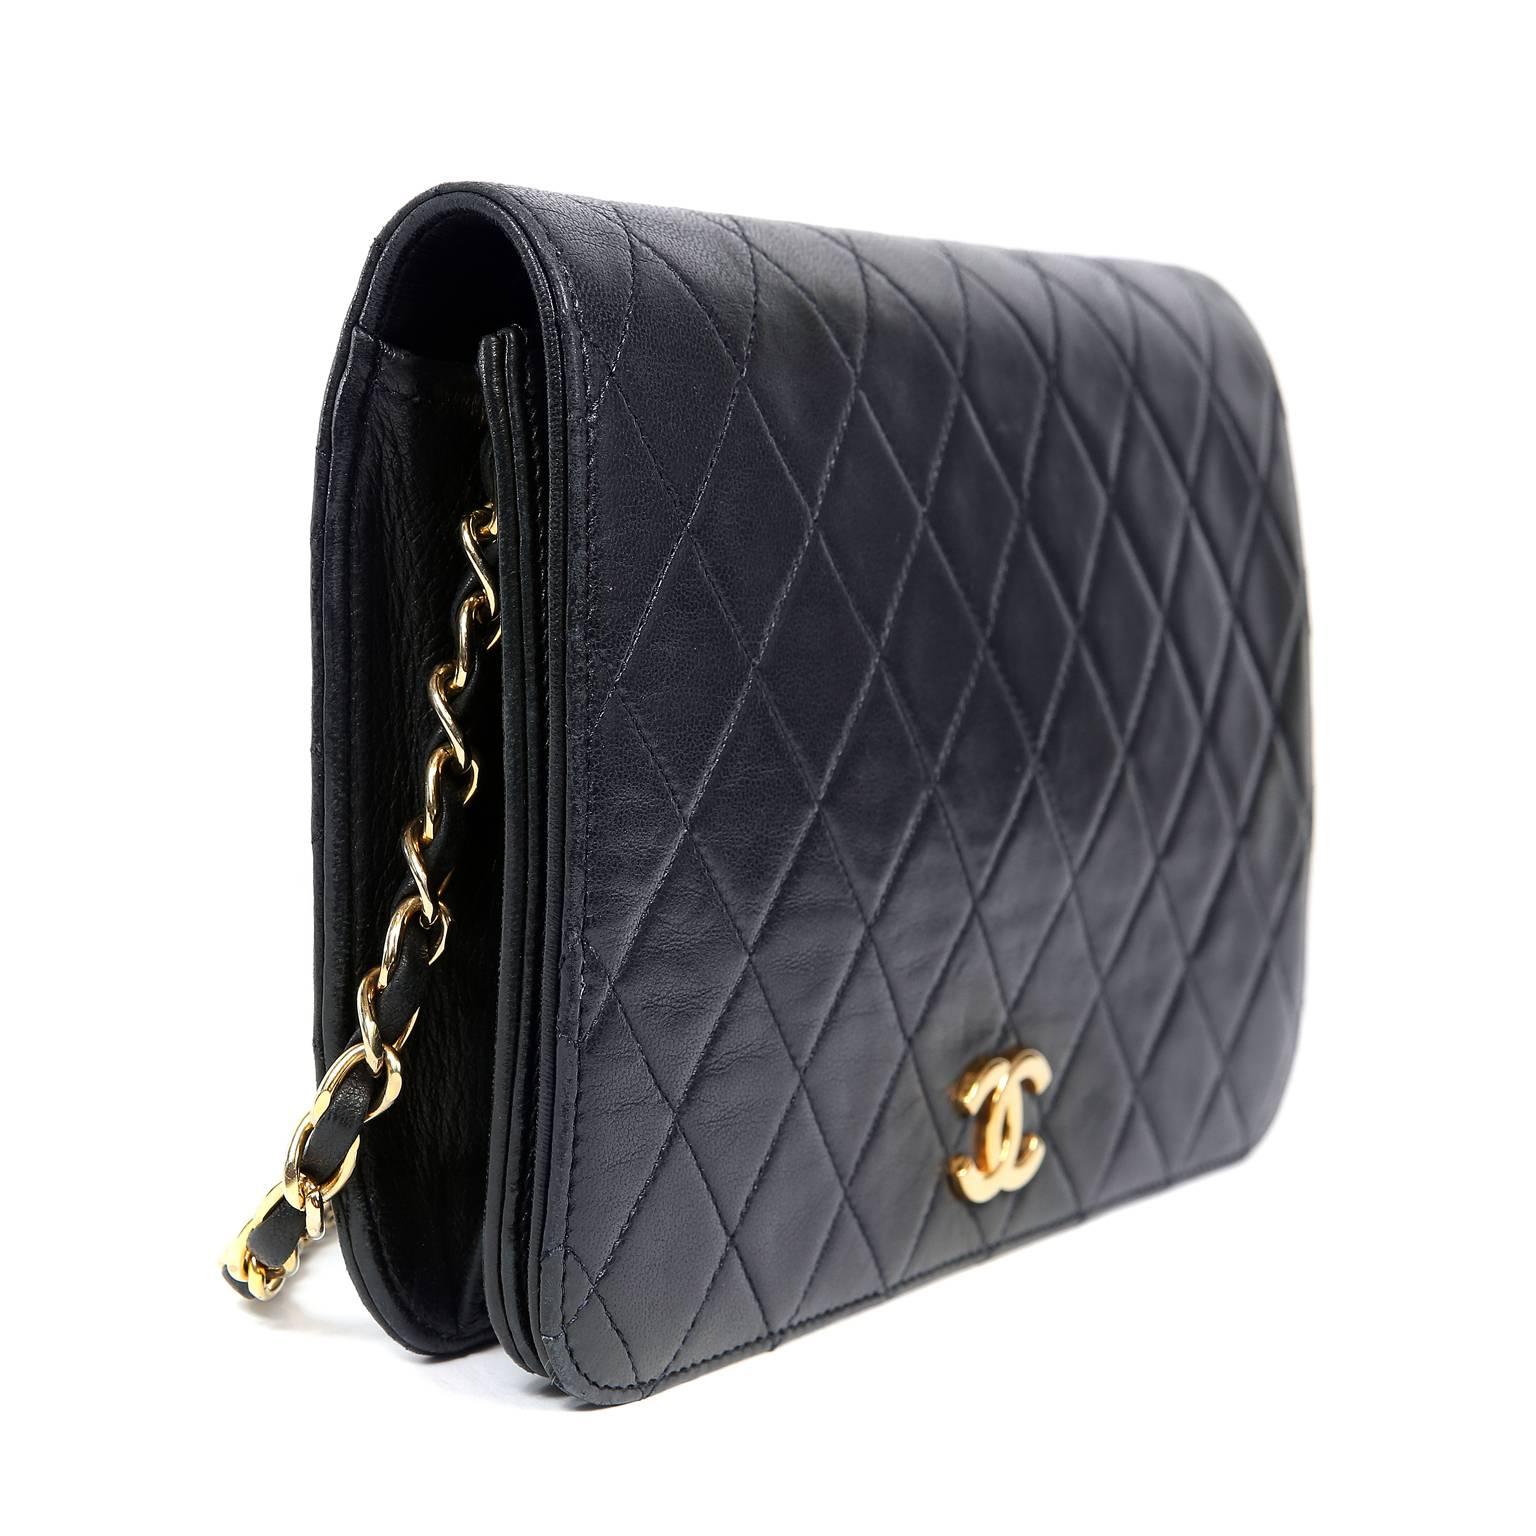 Black Chanel Navy Blue Leather Vintage Clutch with strap